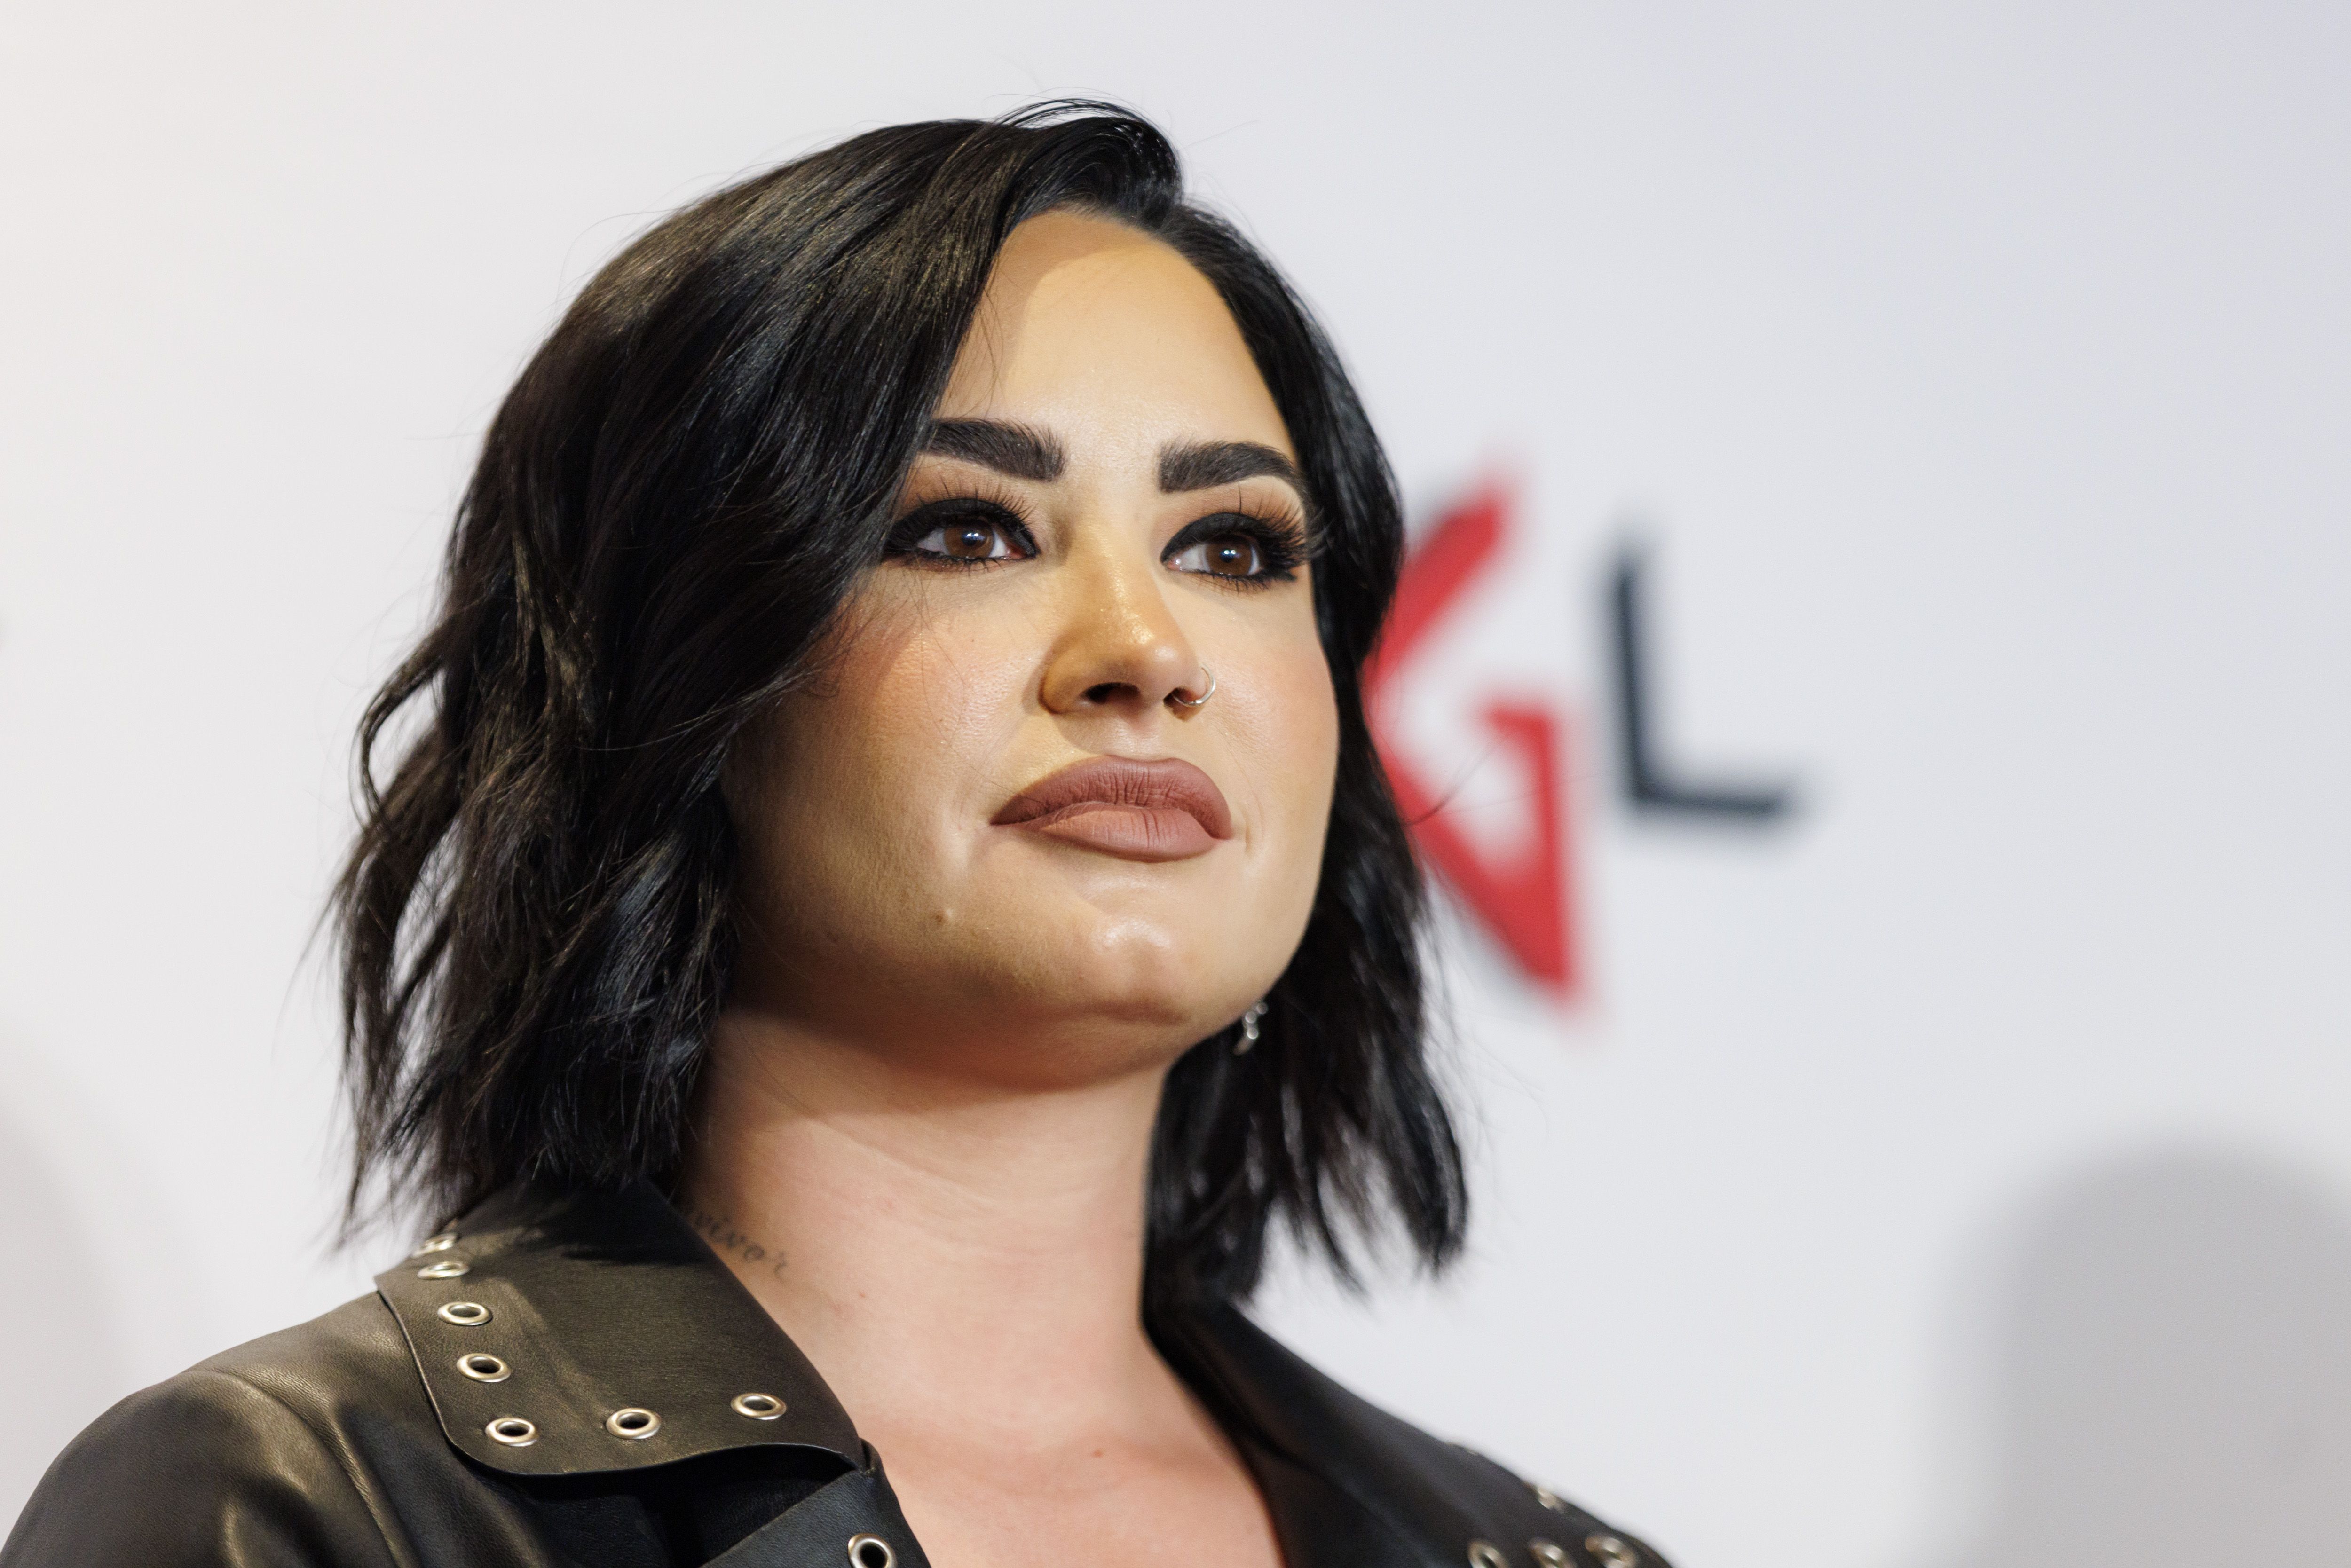 Demi Lovato's Health & Recovery Updates After 2018 Drug Overdose